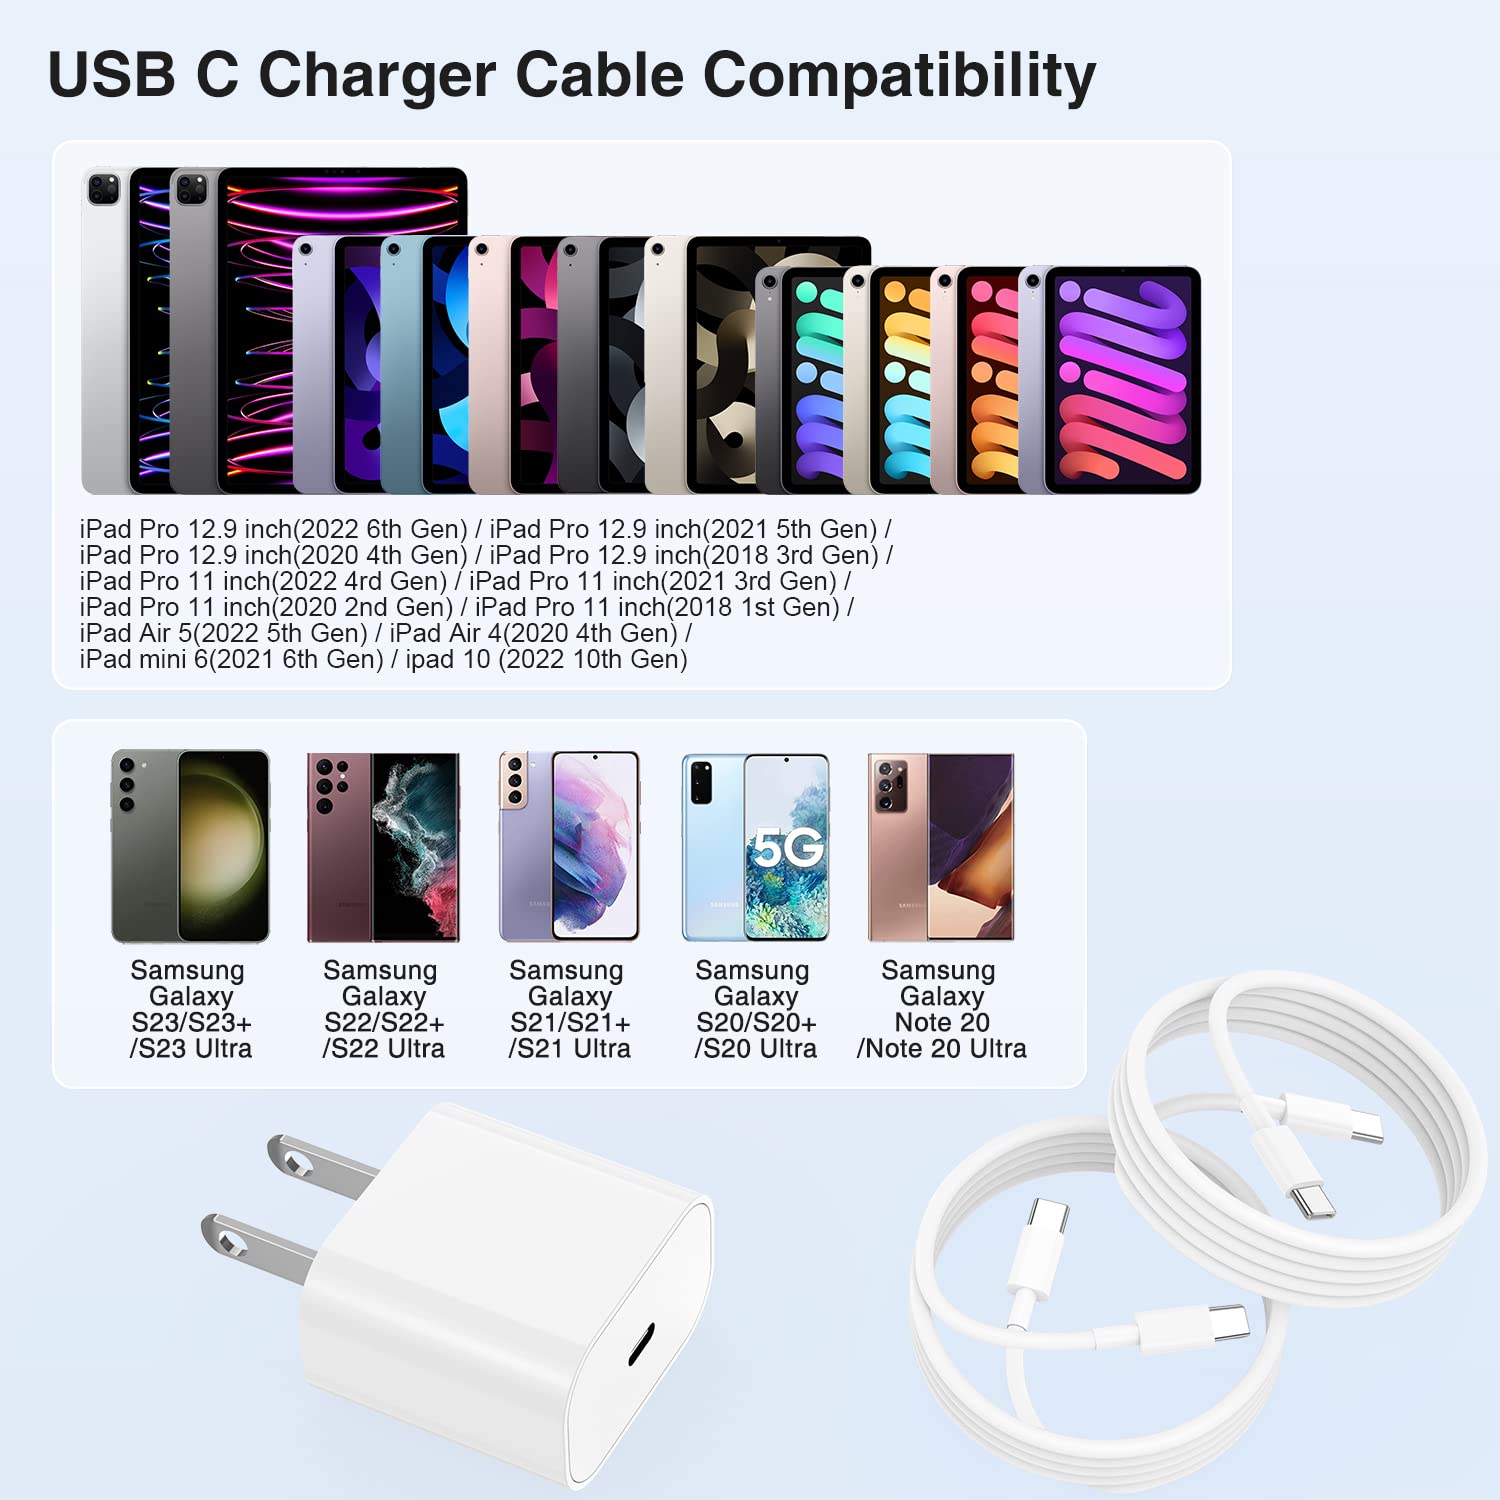 iPad Pro Charger Fast Charging,[Apple Certified]2Pack 10ft iPad Charger Cord Cable with USB C Block Plug for iPad Pro 2022/2021/2020/2018 12.9/11/10.9 inch,5/4/3/2/1th Generation,Air 5/4th,Mini 6 Gen